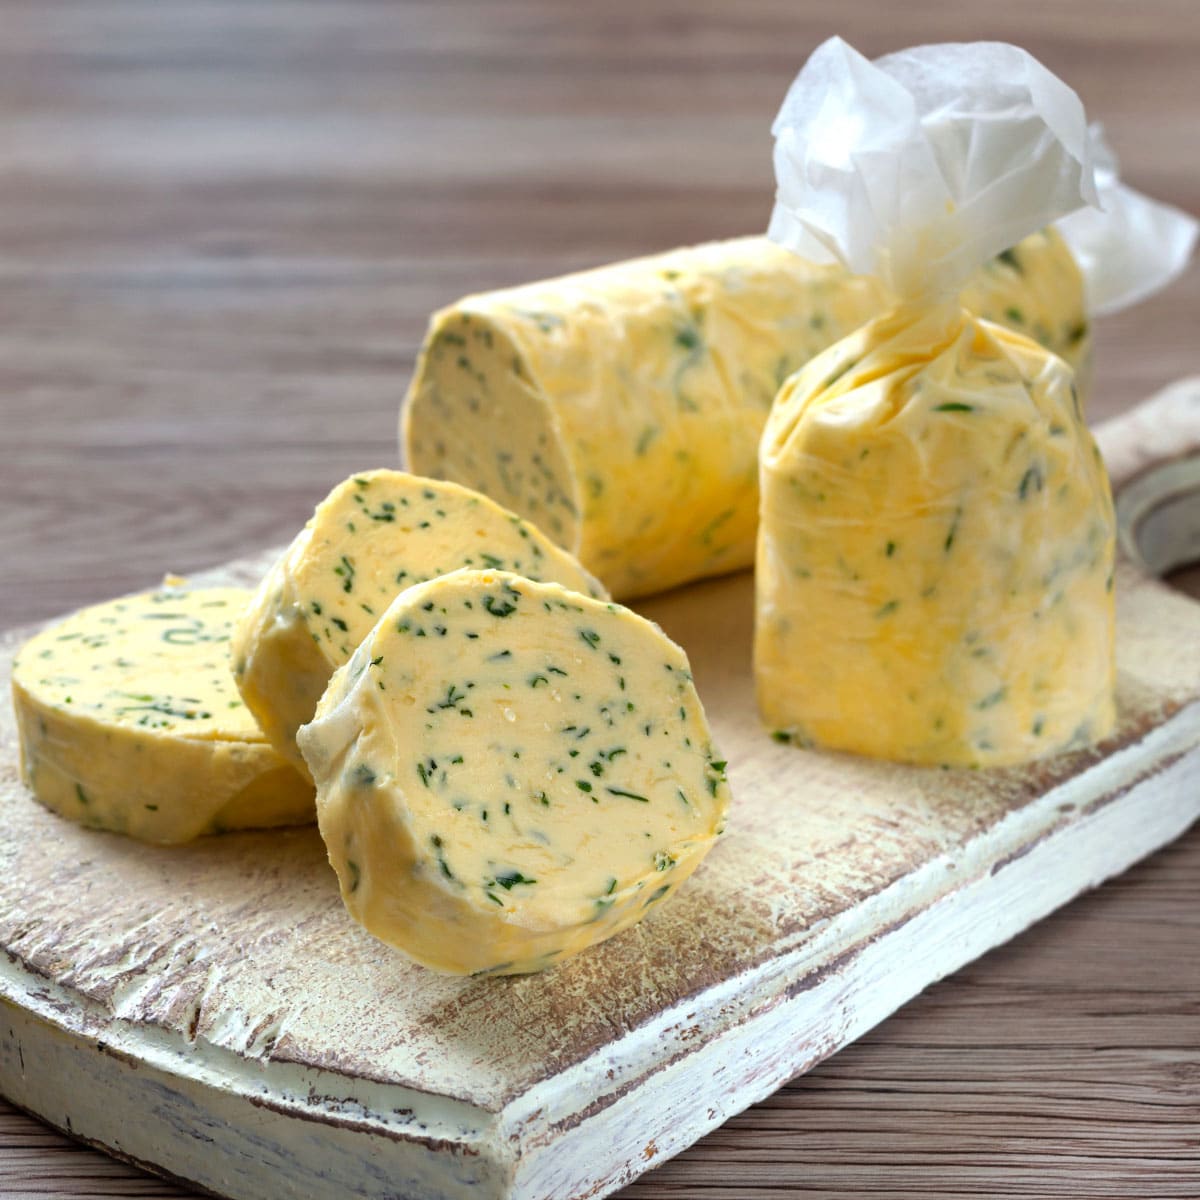 Looking to add a savory and herbaceous twist to your meals? Try making your own Cheesecake Factory butter! This compound butter recipe is simple to make and can be customized to suit your taste preferences.